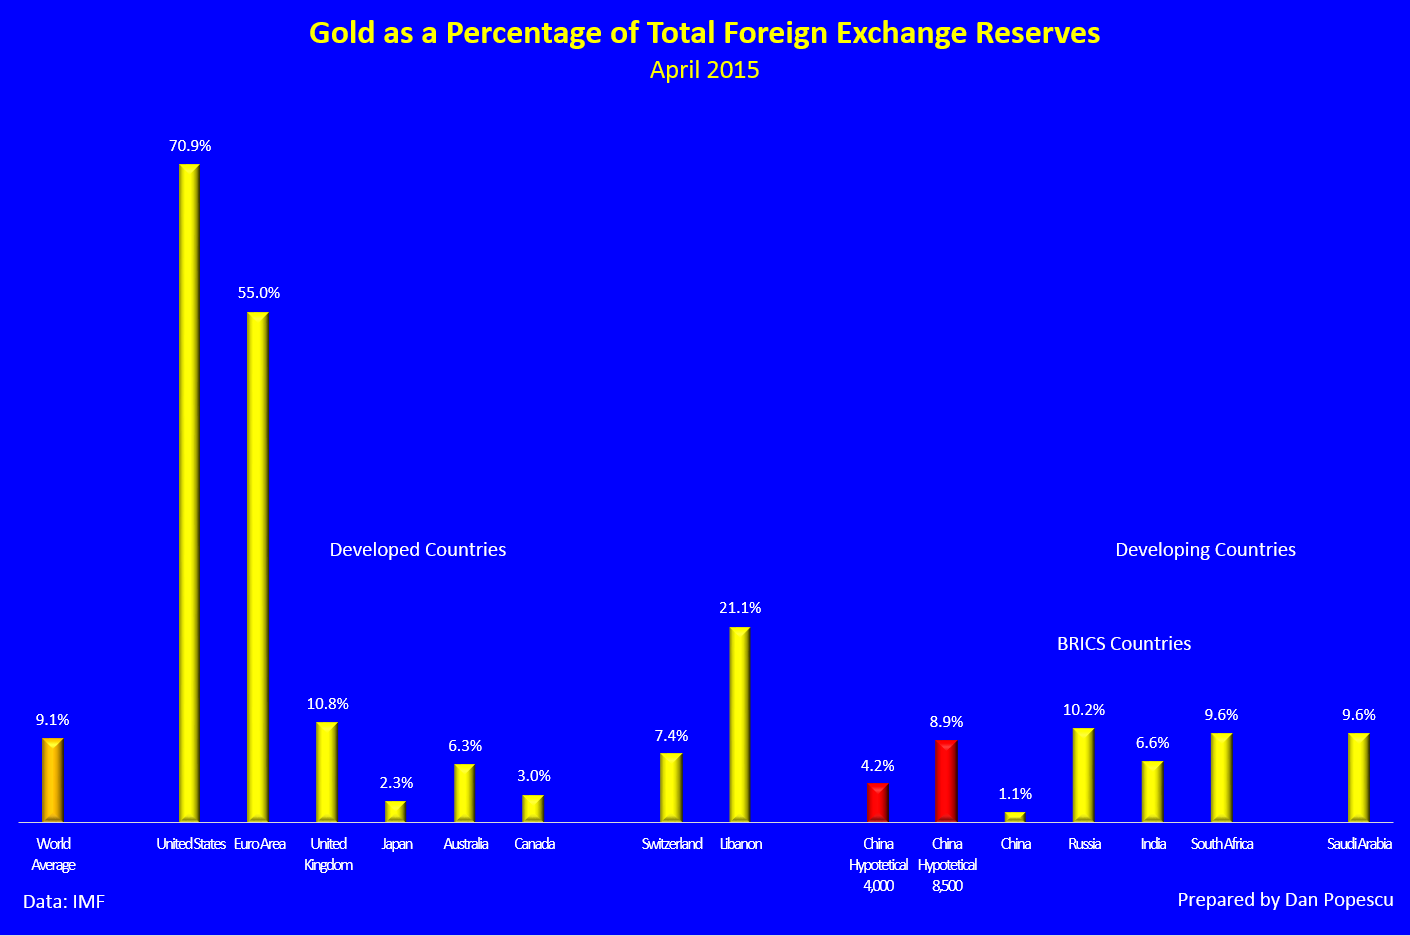 Gold as a Percentage of Total Foreign Exchange Reserves